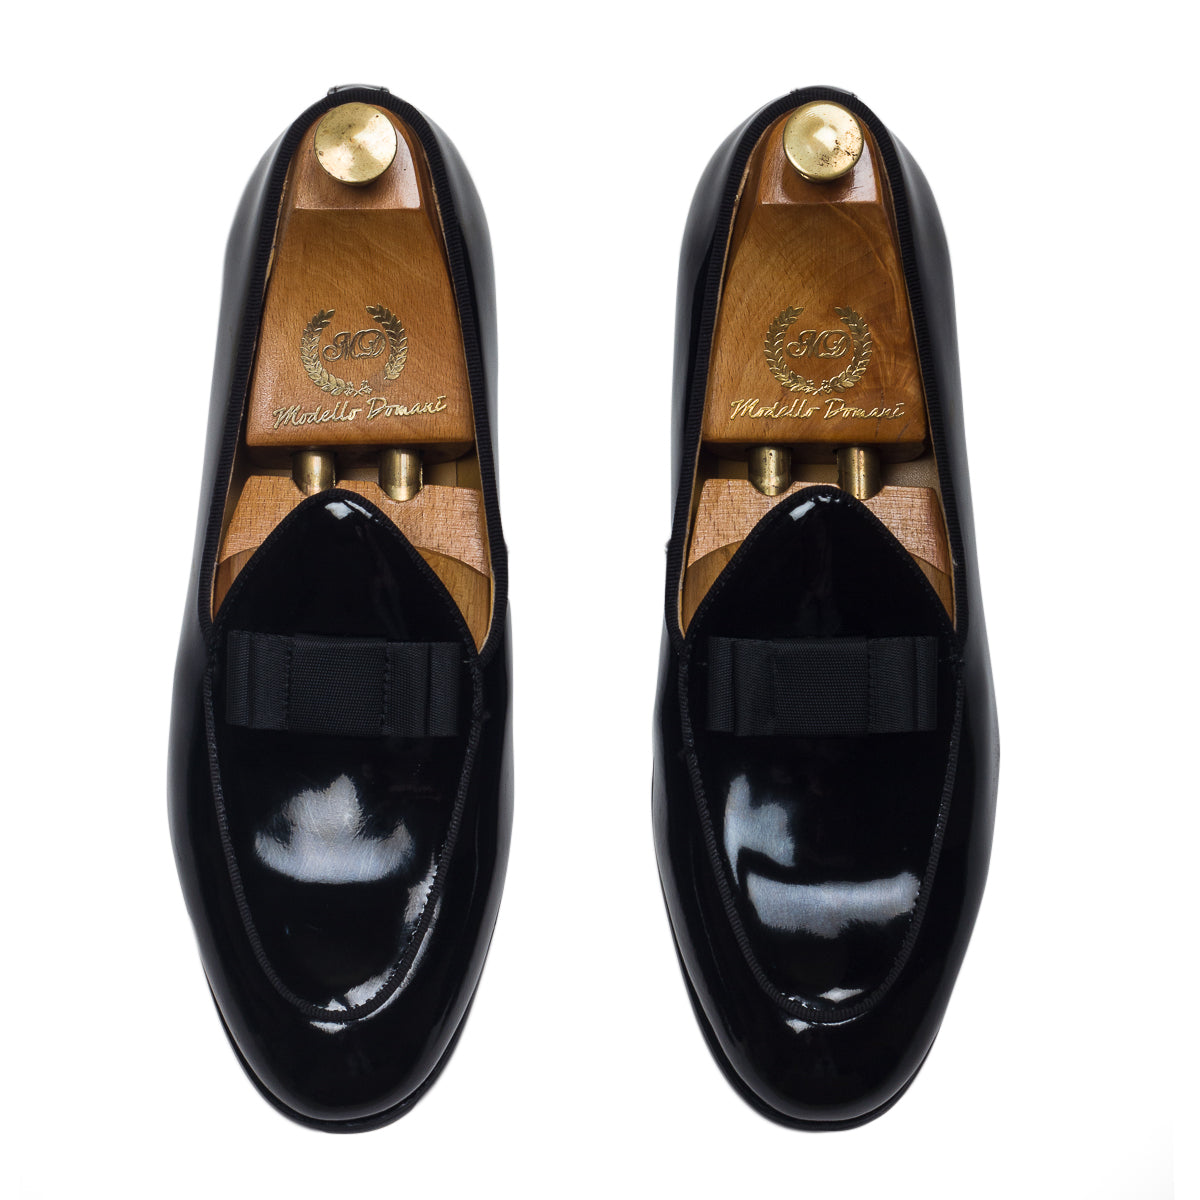 Milano Leather Bowtie Slipons (Patent Black - Limited Edition)